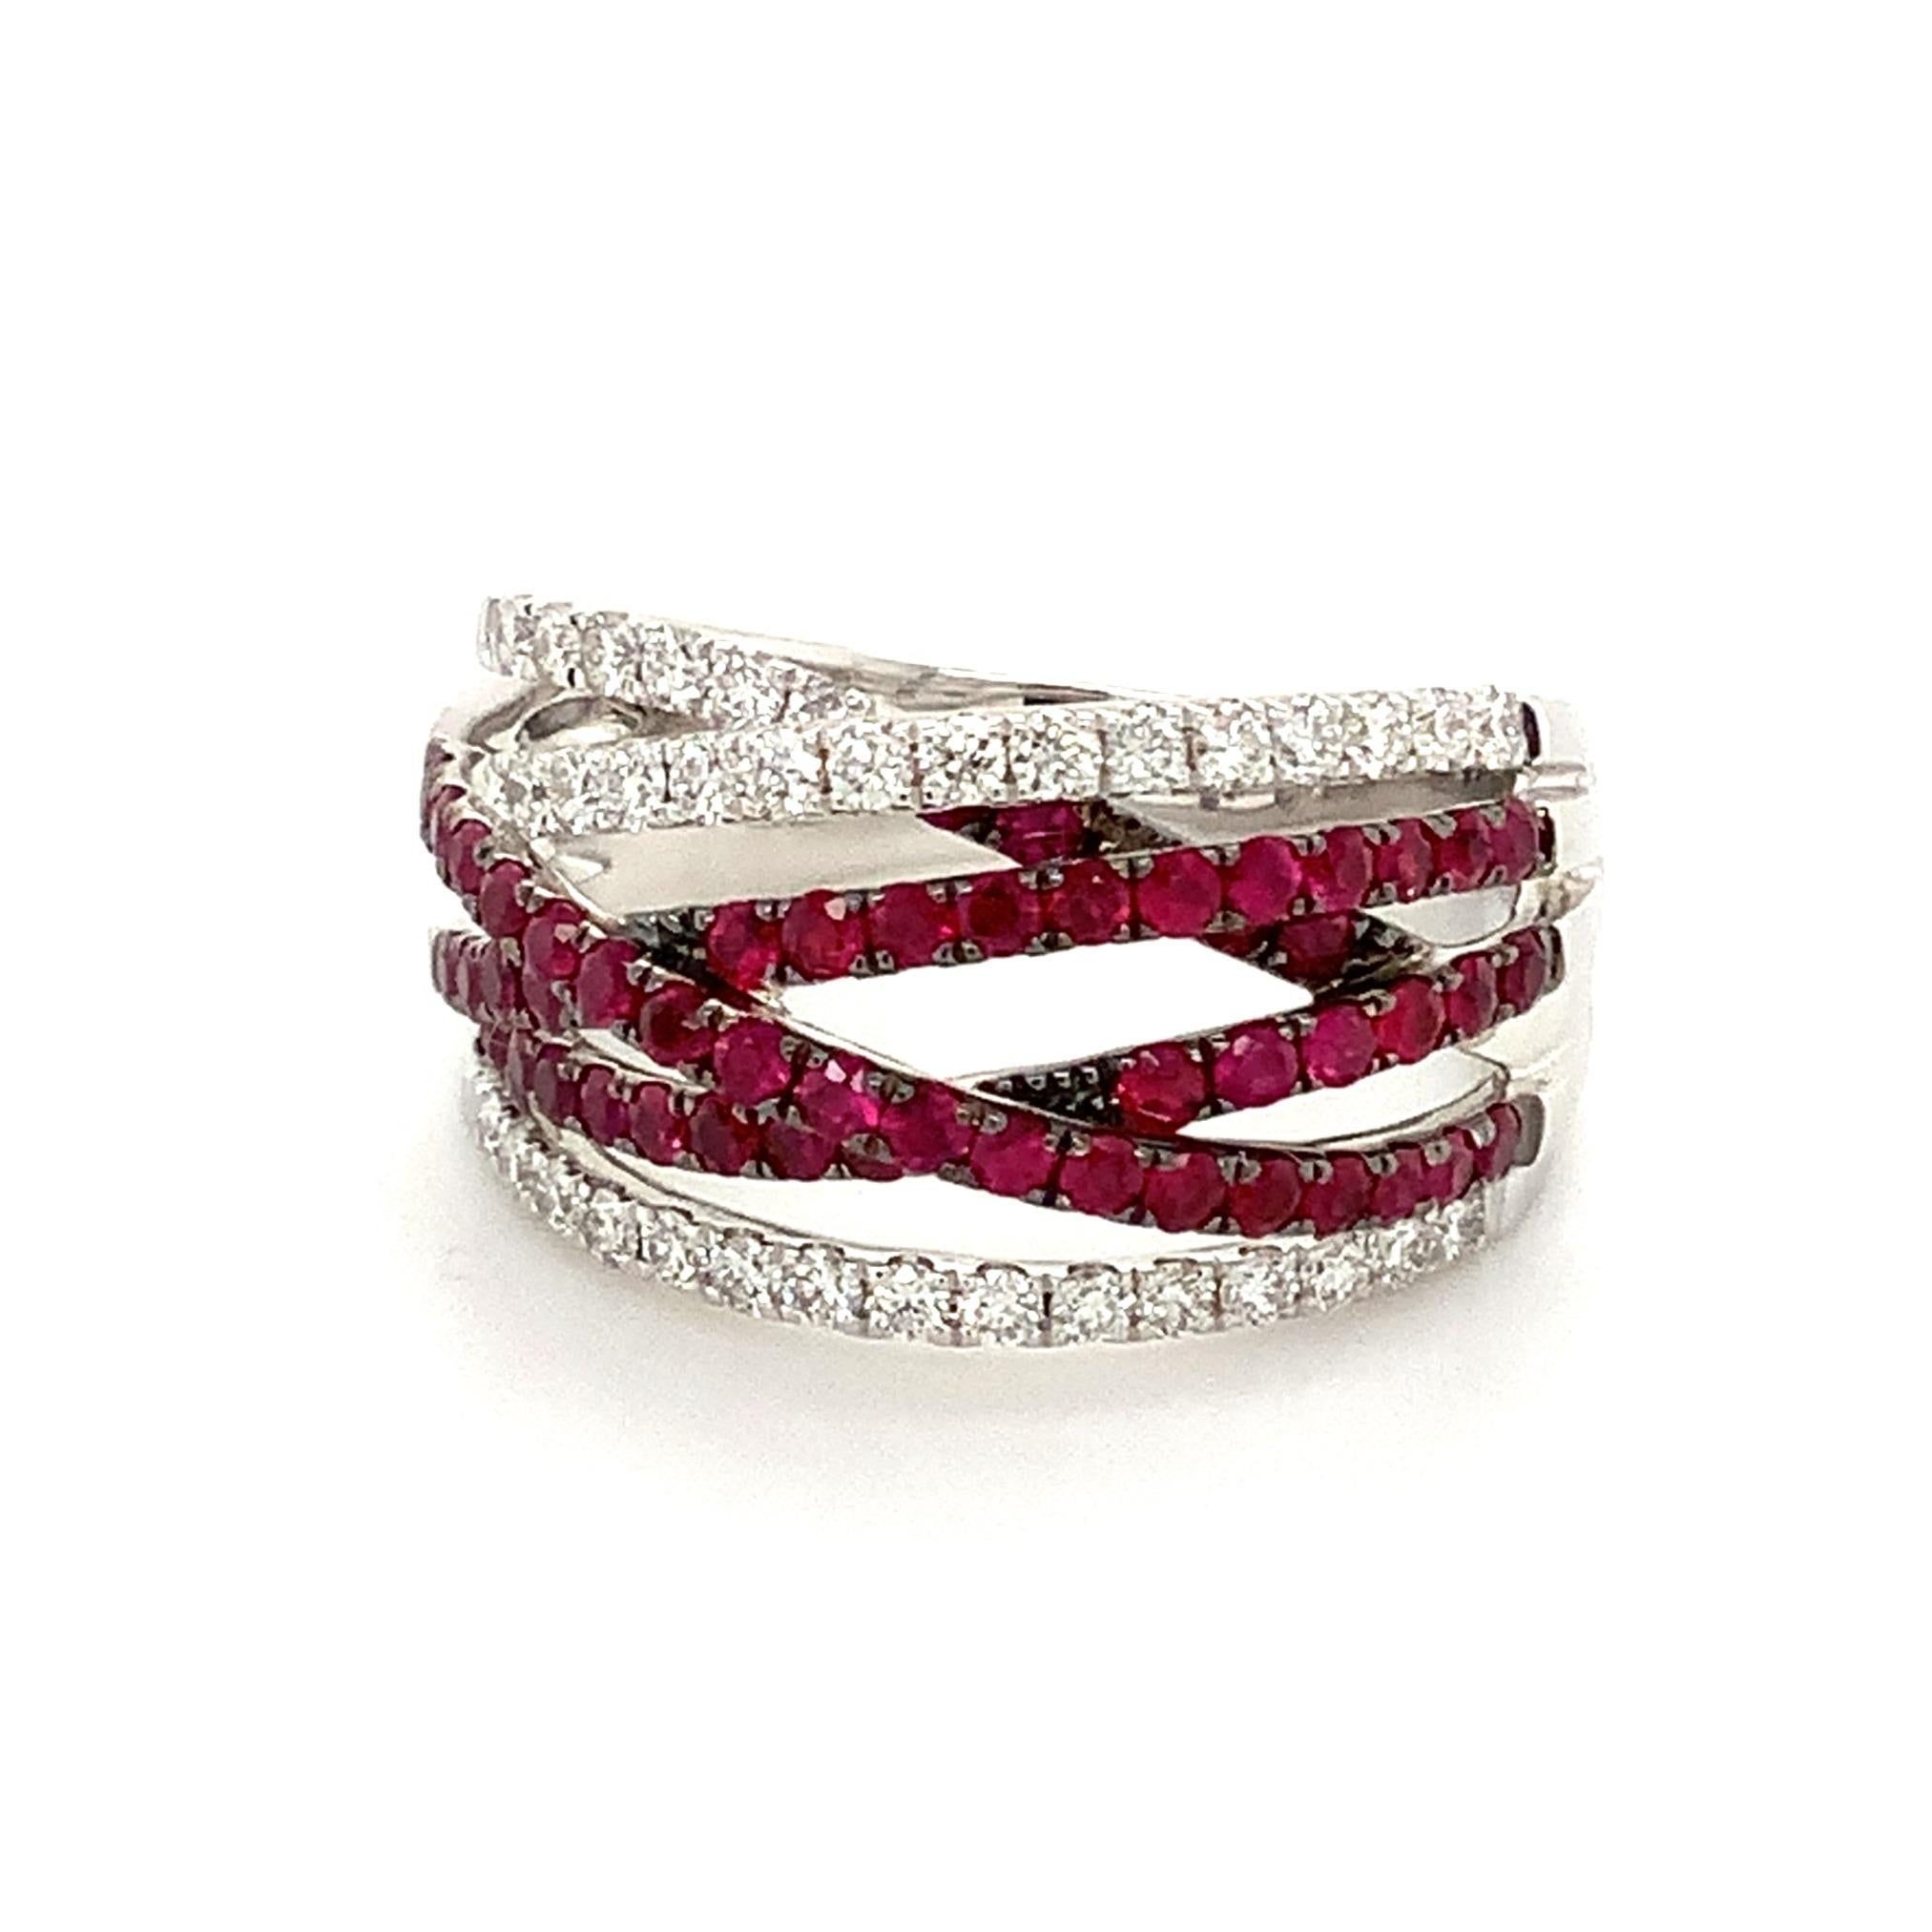  This Afrin Collection Over and Under Six Row Woven Band in 18 Kt White Gold Features Black Rhodium Detailing.
Round Brilliant Cut Diamonds = 0.47 cts t.w.  G in Color VS in Clarity
Brilliant Cut Rubies = 0.85 cts t.w. Bright Red Medium Dark Red